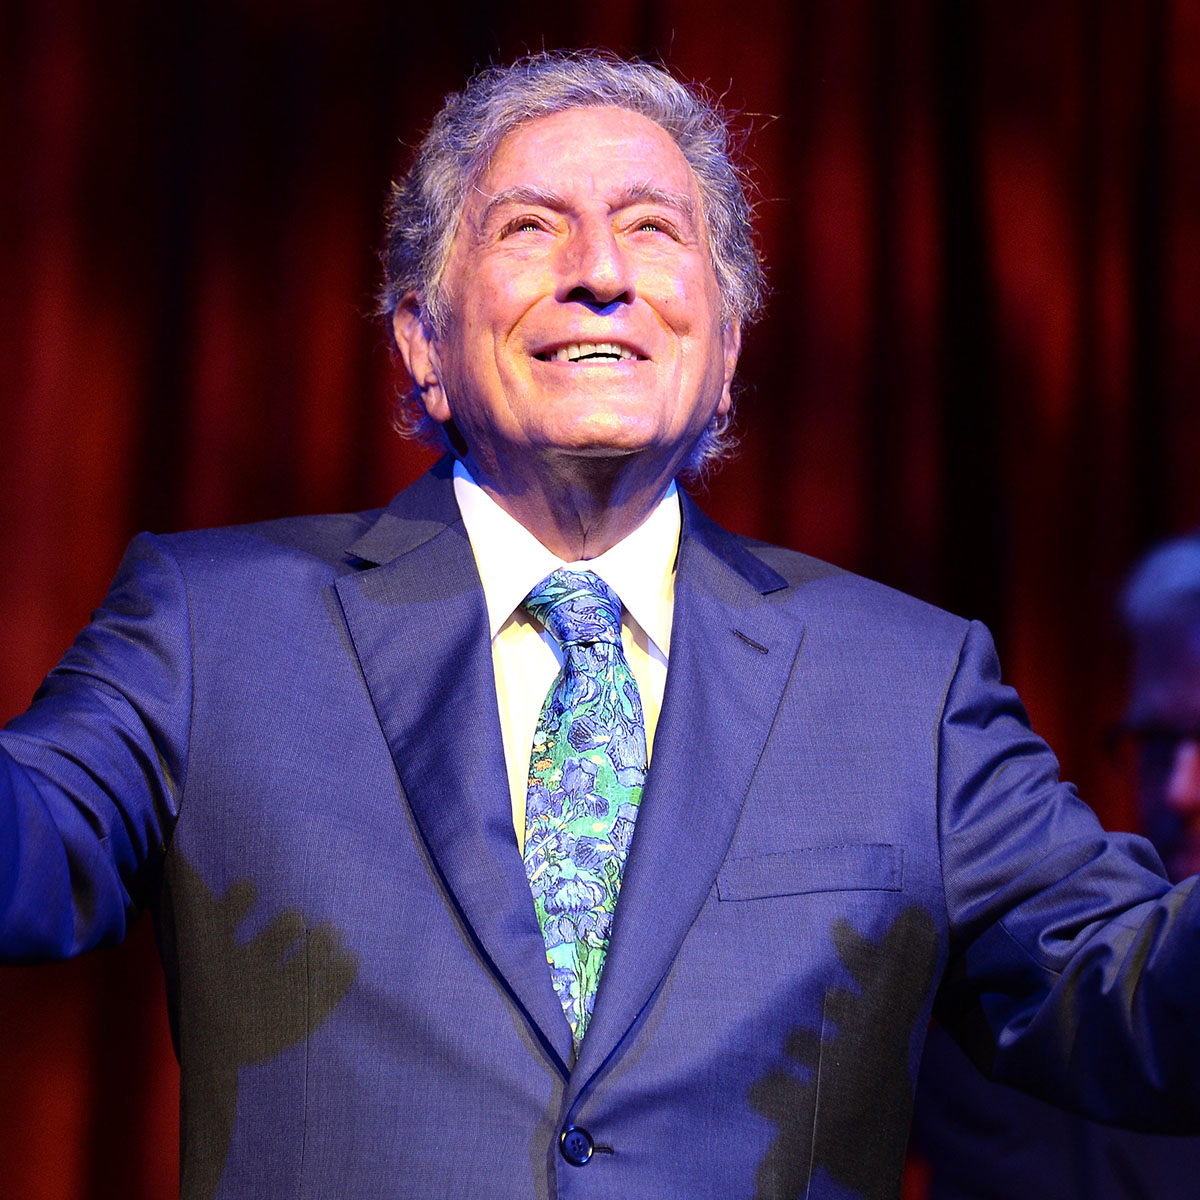 Anderson Cooper, Carson Daly & More Honor Tony Bennett After His Death